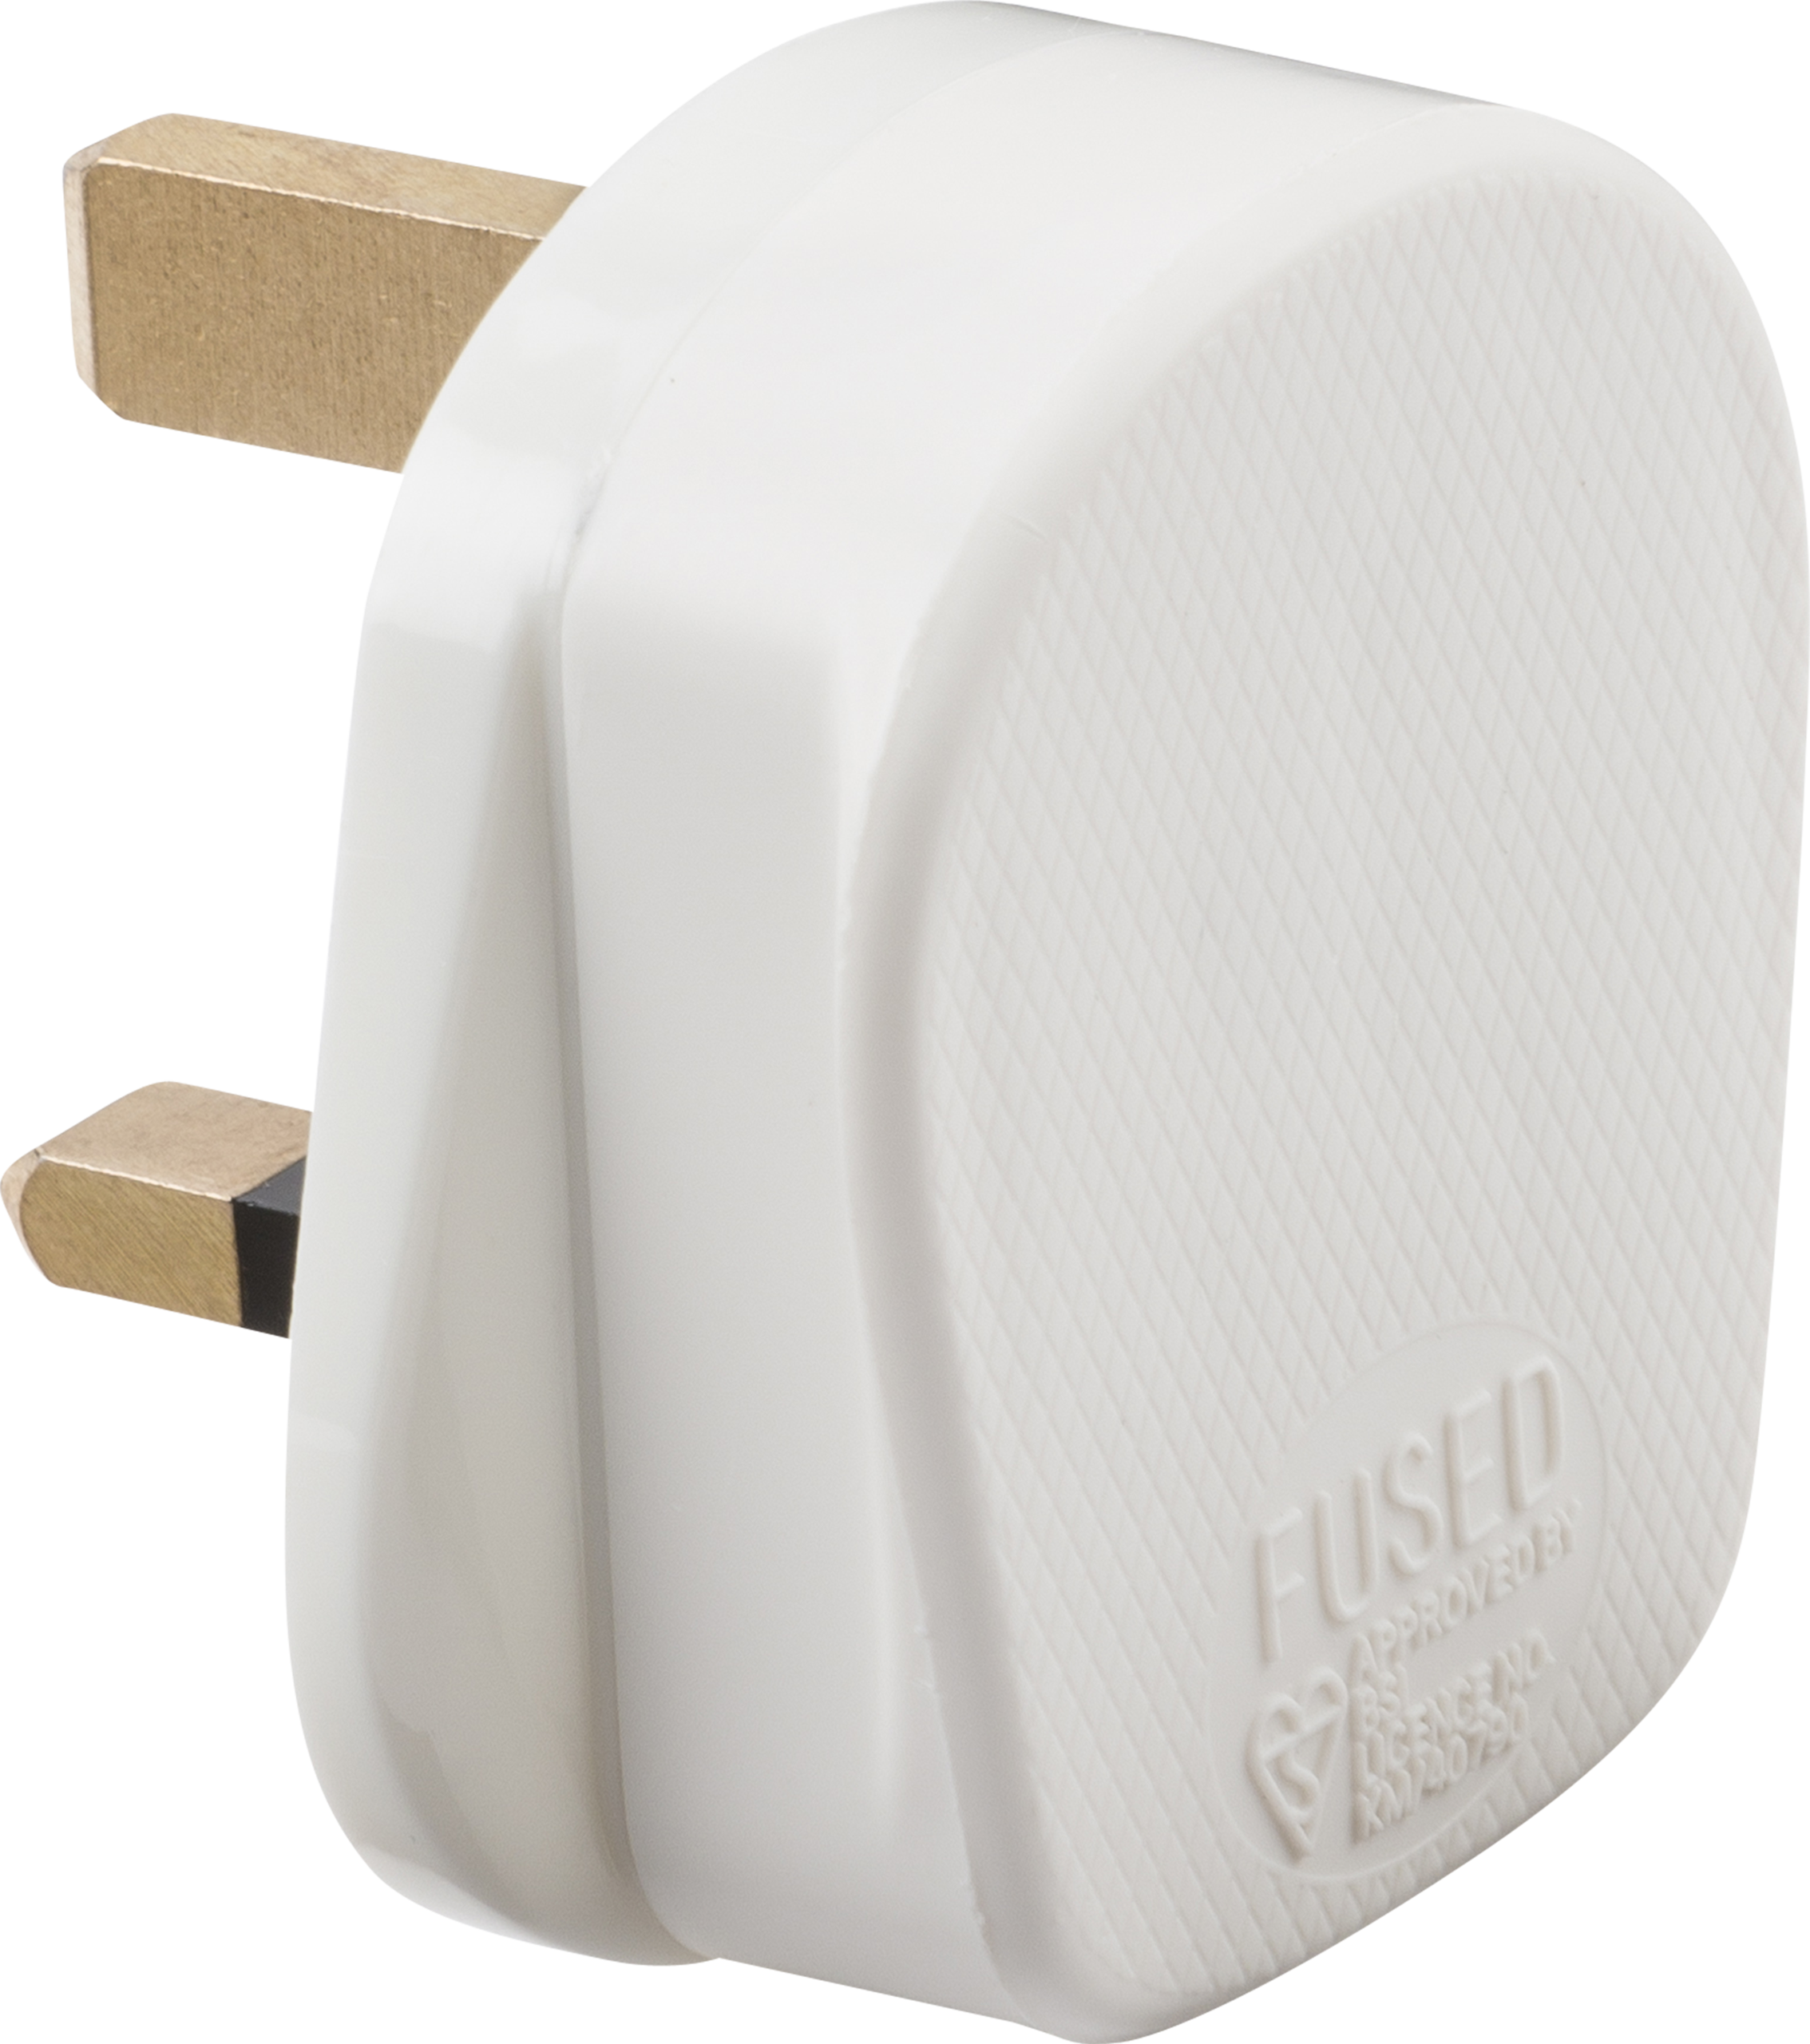 13A Rough Use Plug Top 13 Amp Fused - Clamp Type Cord Grip - White - 2135-RW 